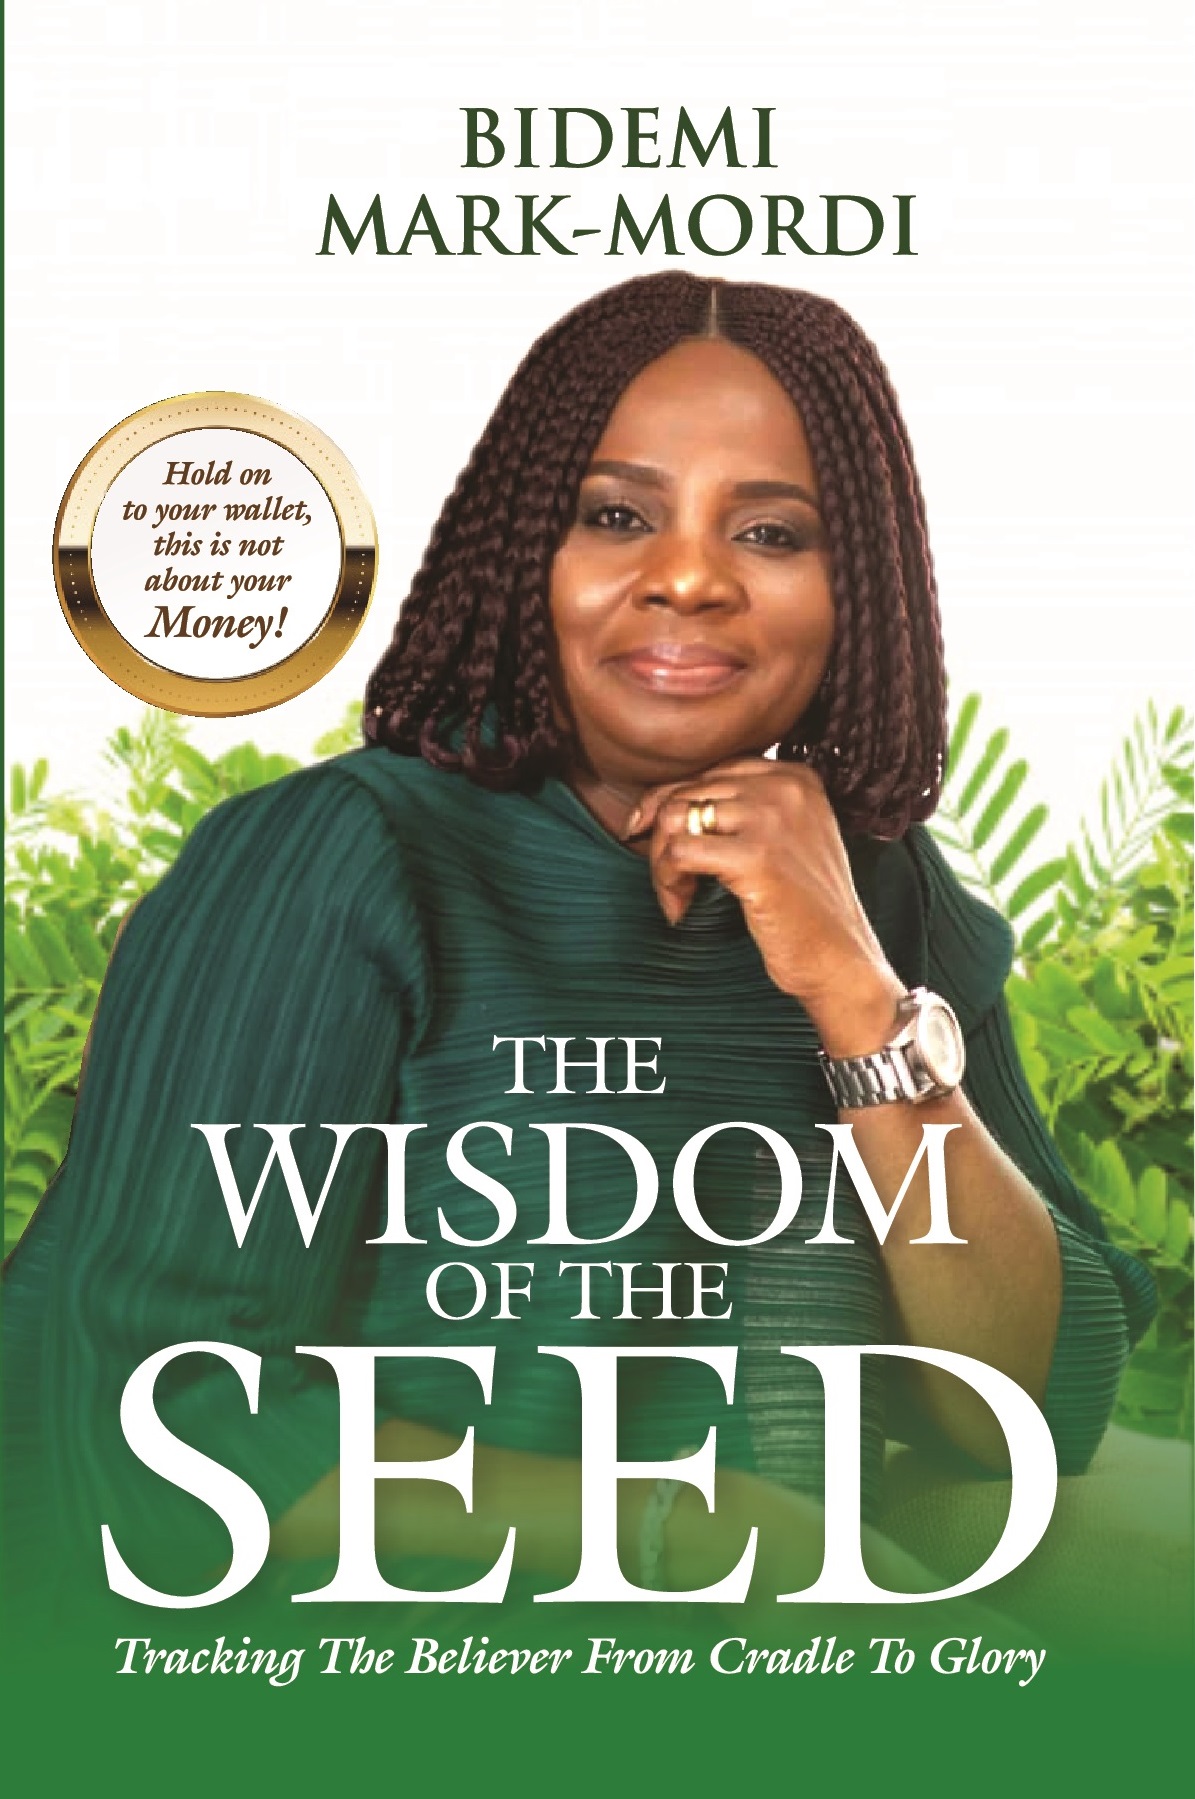 The Wisdom of the Seed